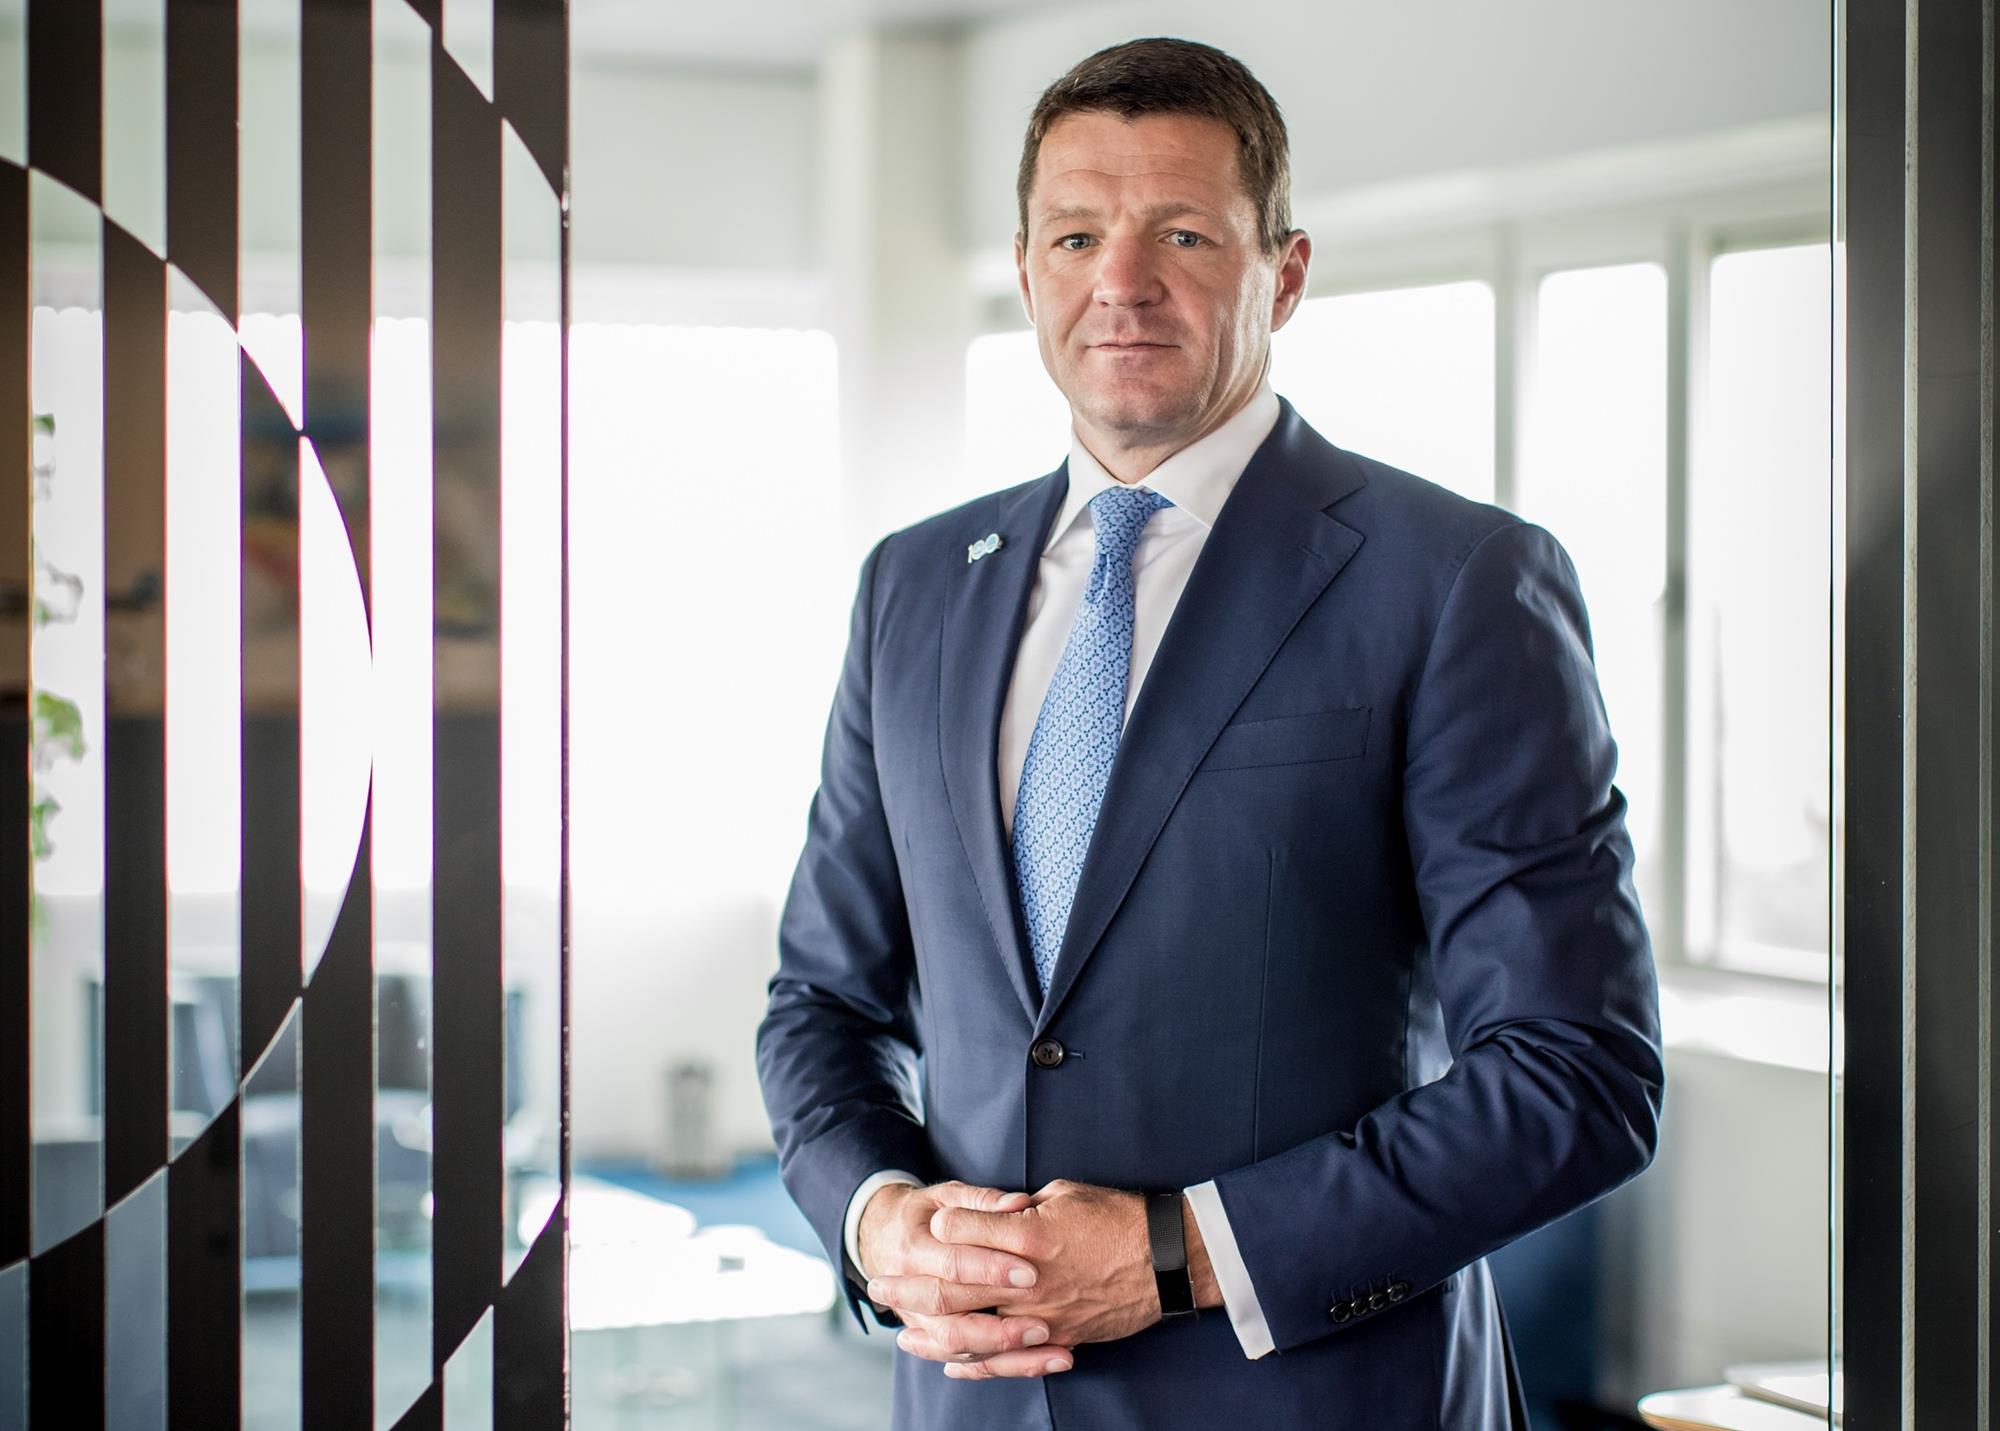 IndiGo CEO Pieter Elbers appointed as the Chair-elect of IATA’s Board of Governors